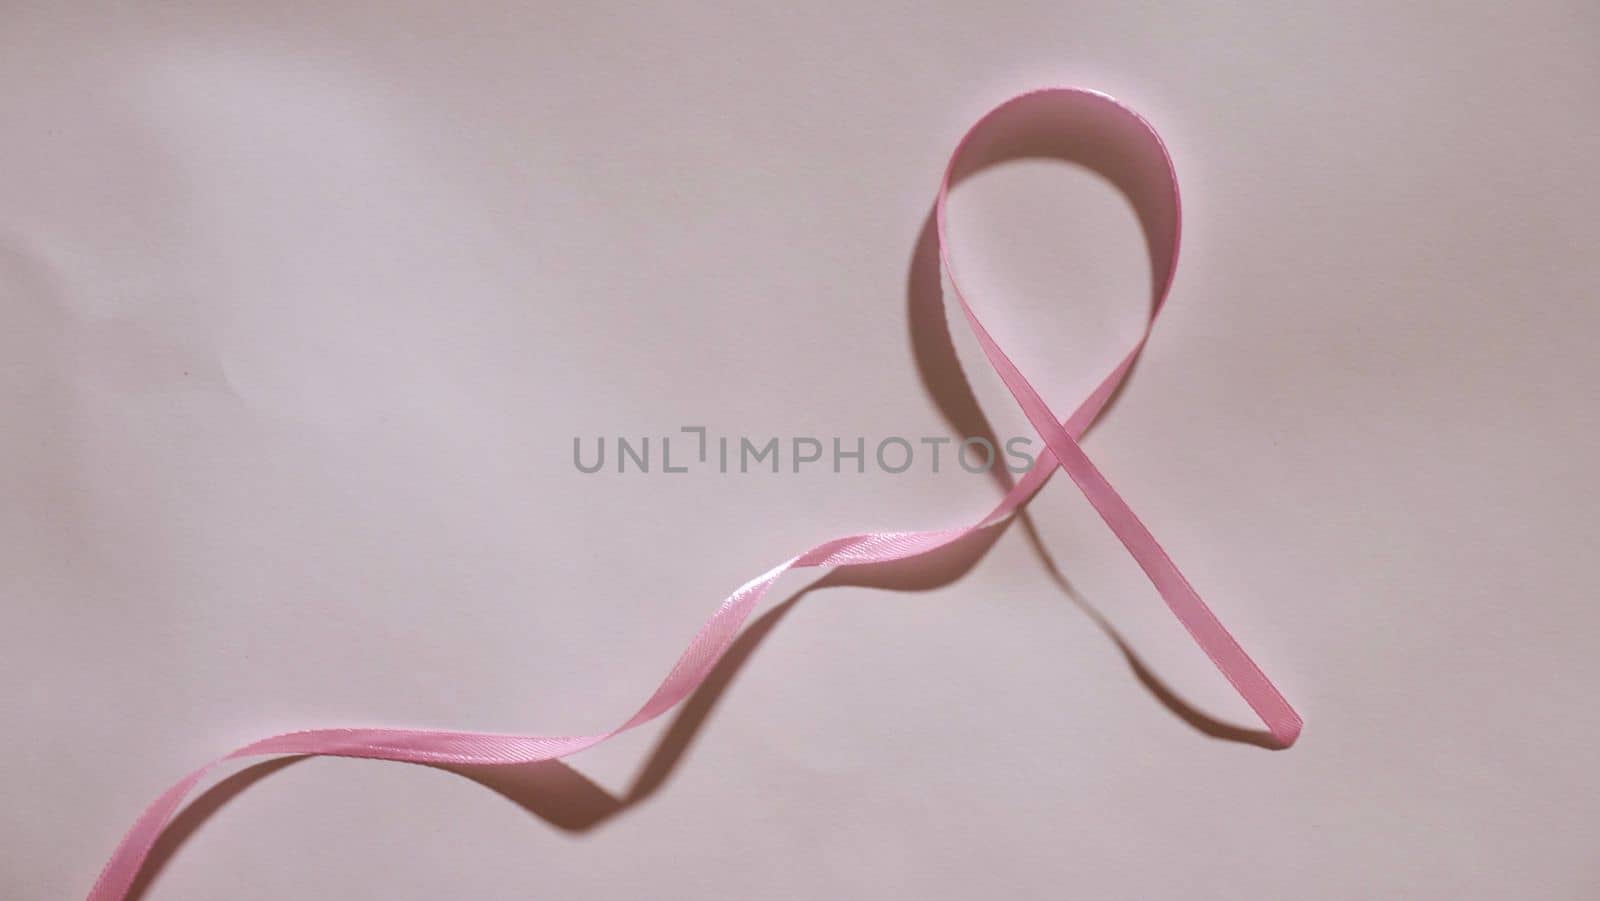 Breast Cancer disease symbol with pink ribbon on white background close-up on world Cancer Awareness Day 4 February